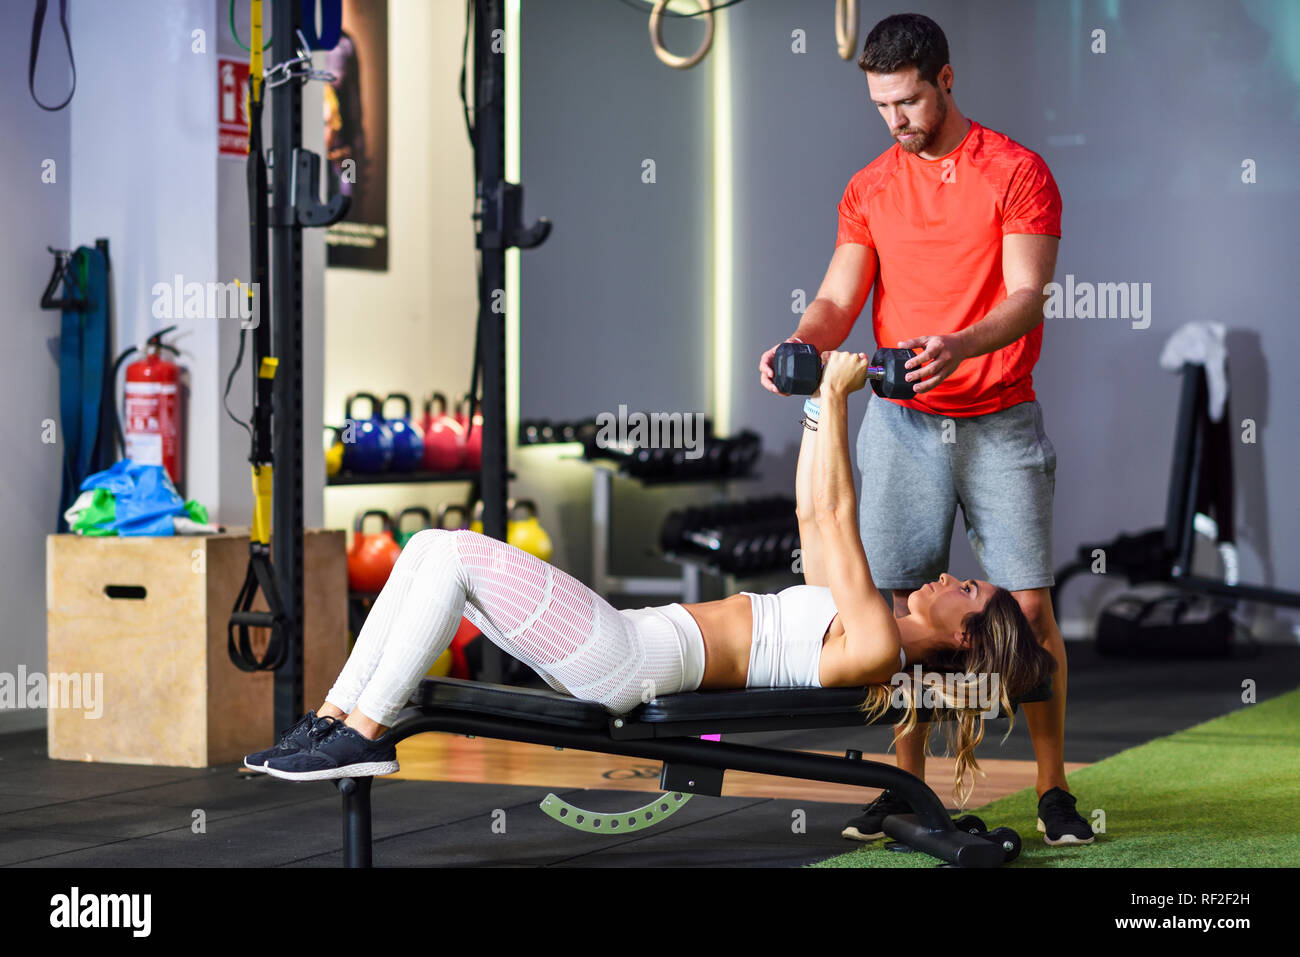 Personal trainer assisting client with weight training, lifting dumbells, lying on bench Stock Photo